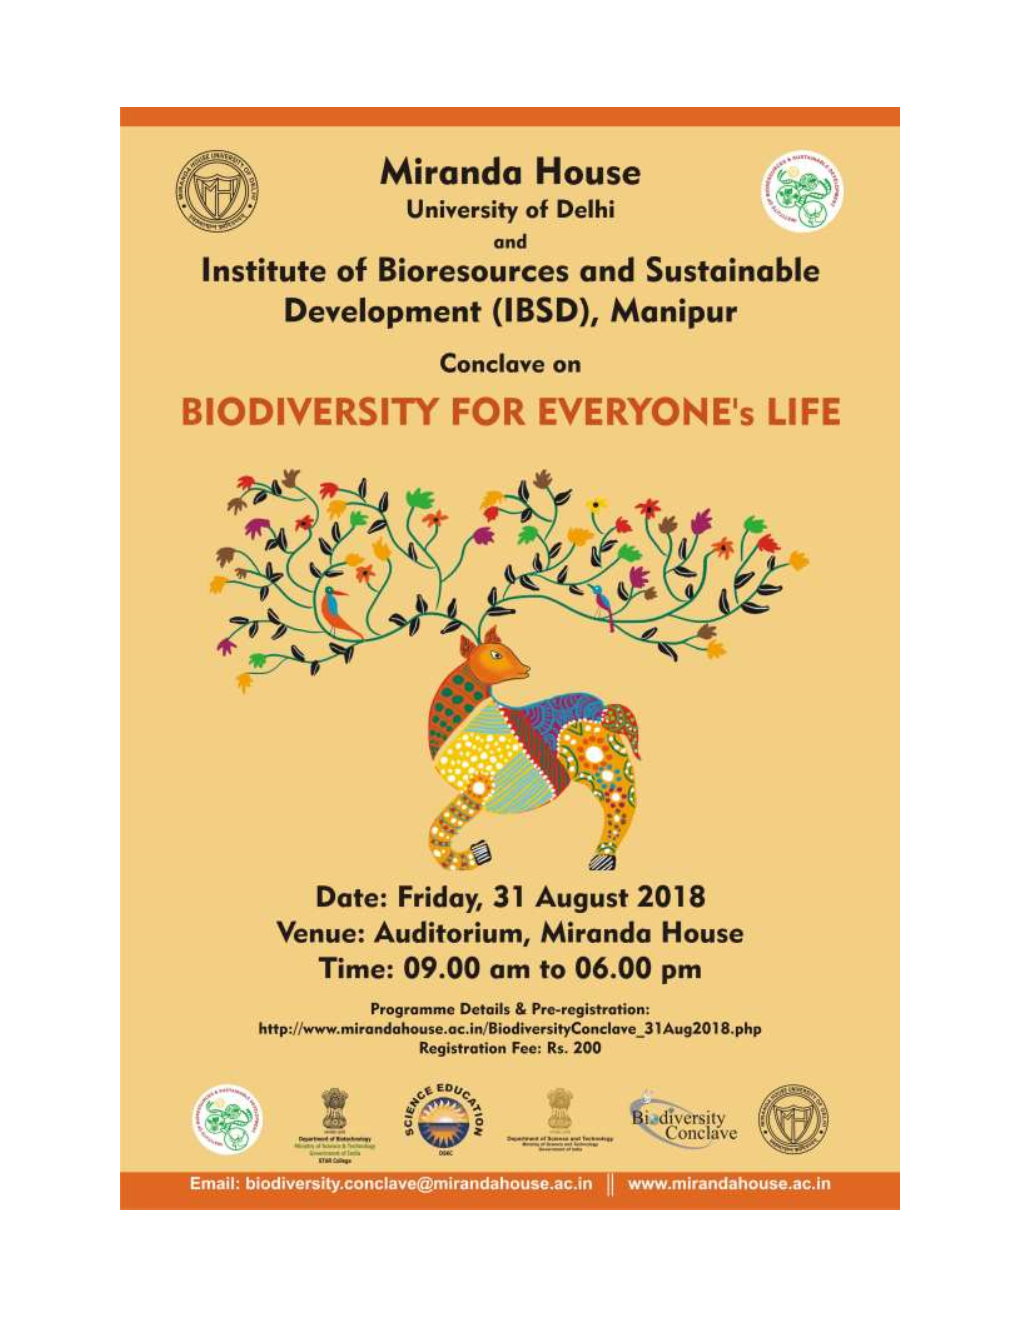 Biodiversity for Everyone's Life